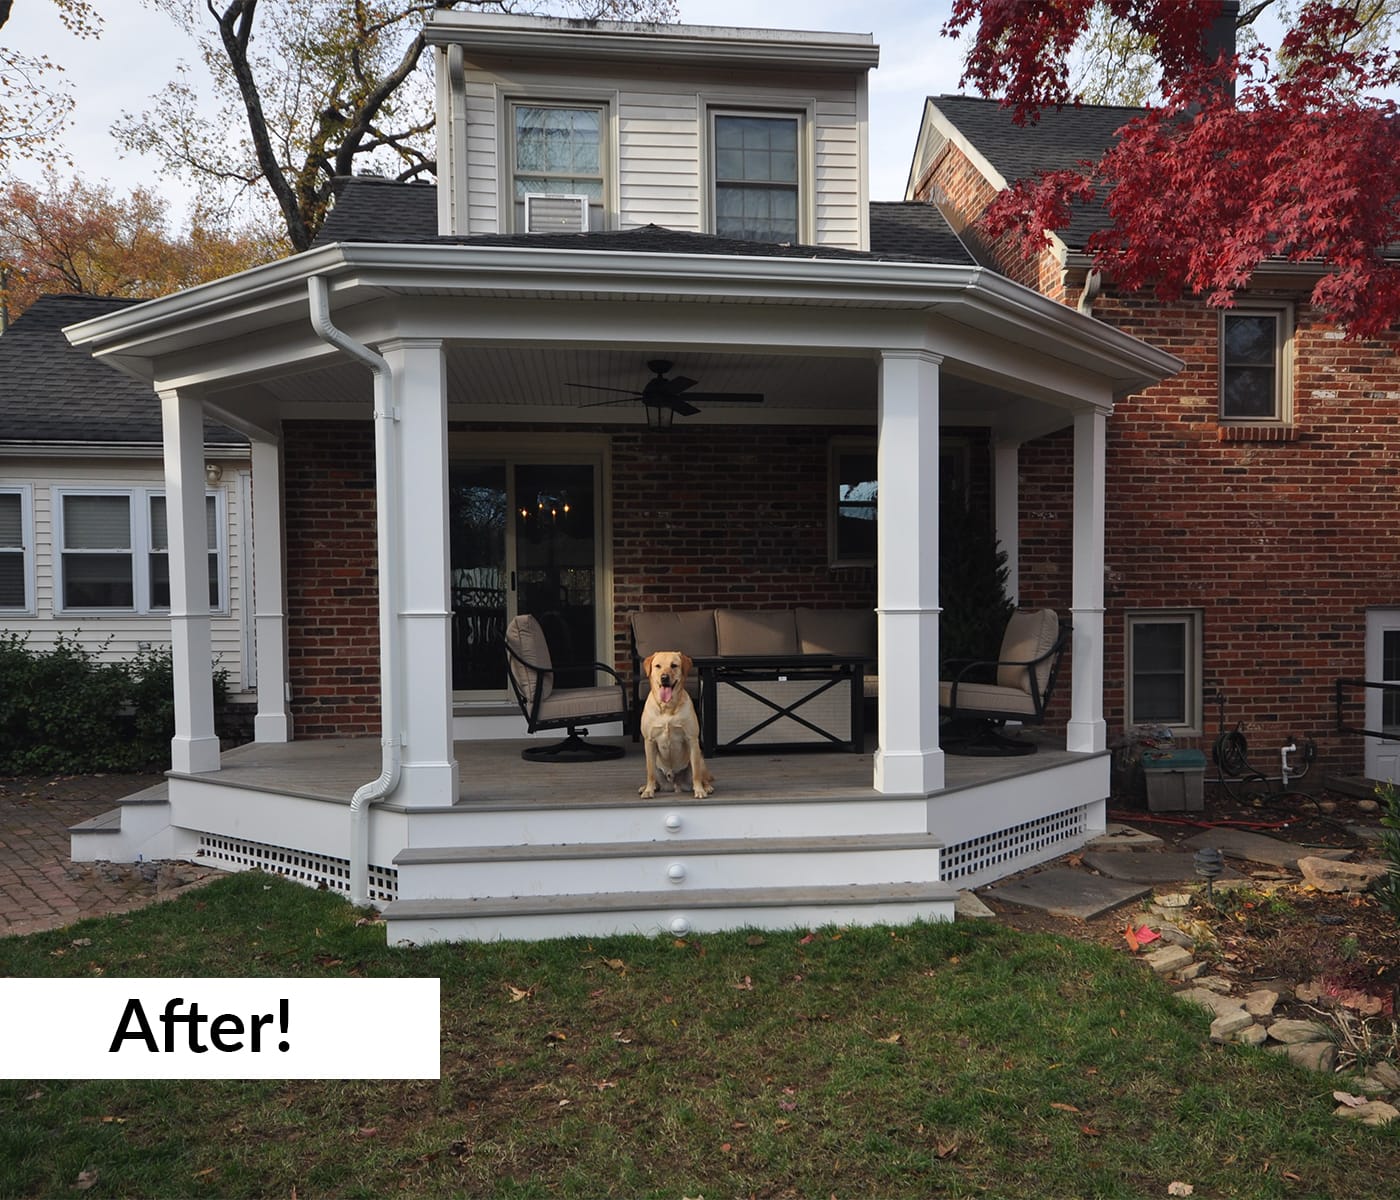 AFTER porch addition in Alexandria VA with dog enjoying his new spot